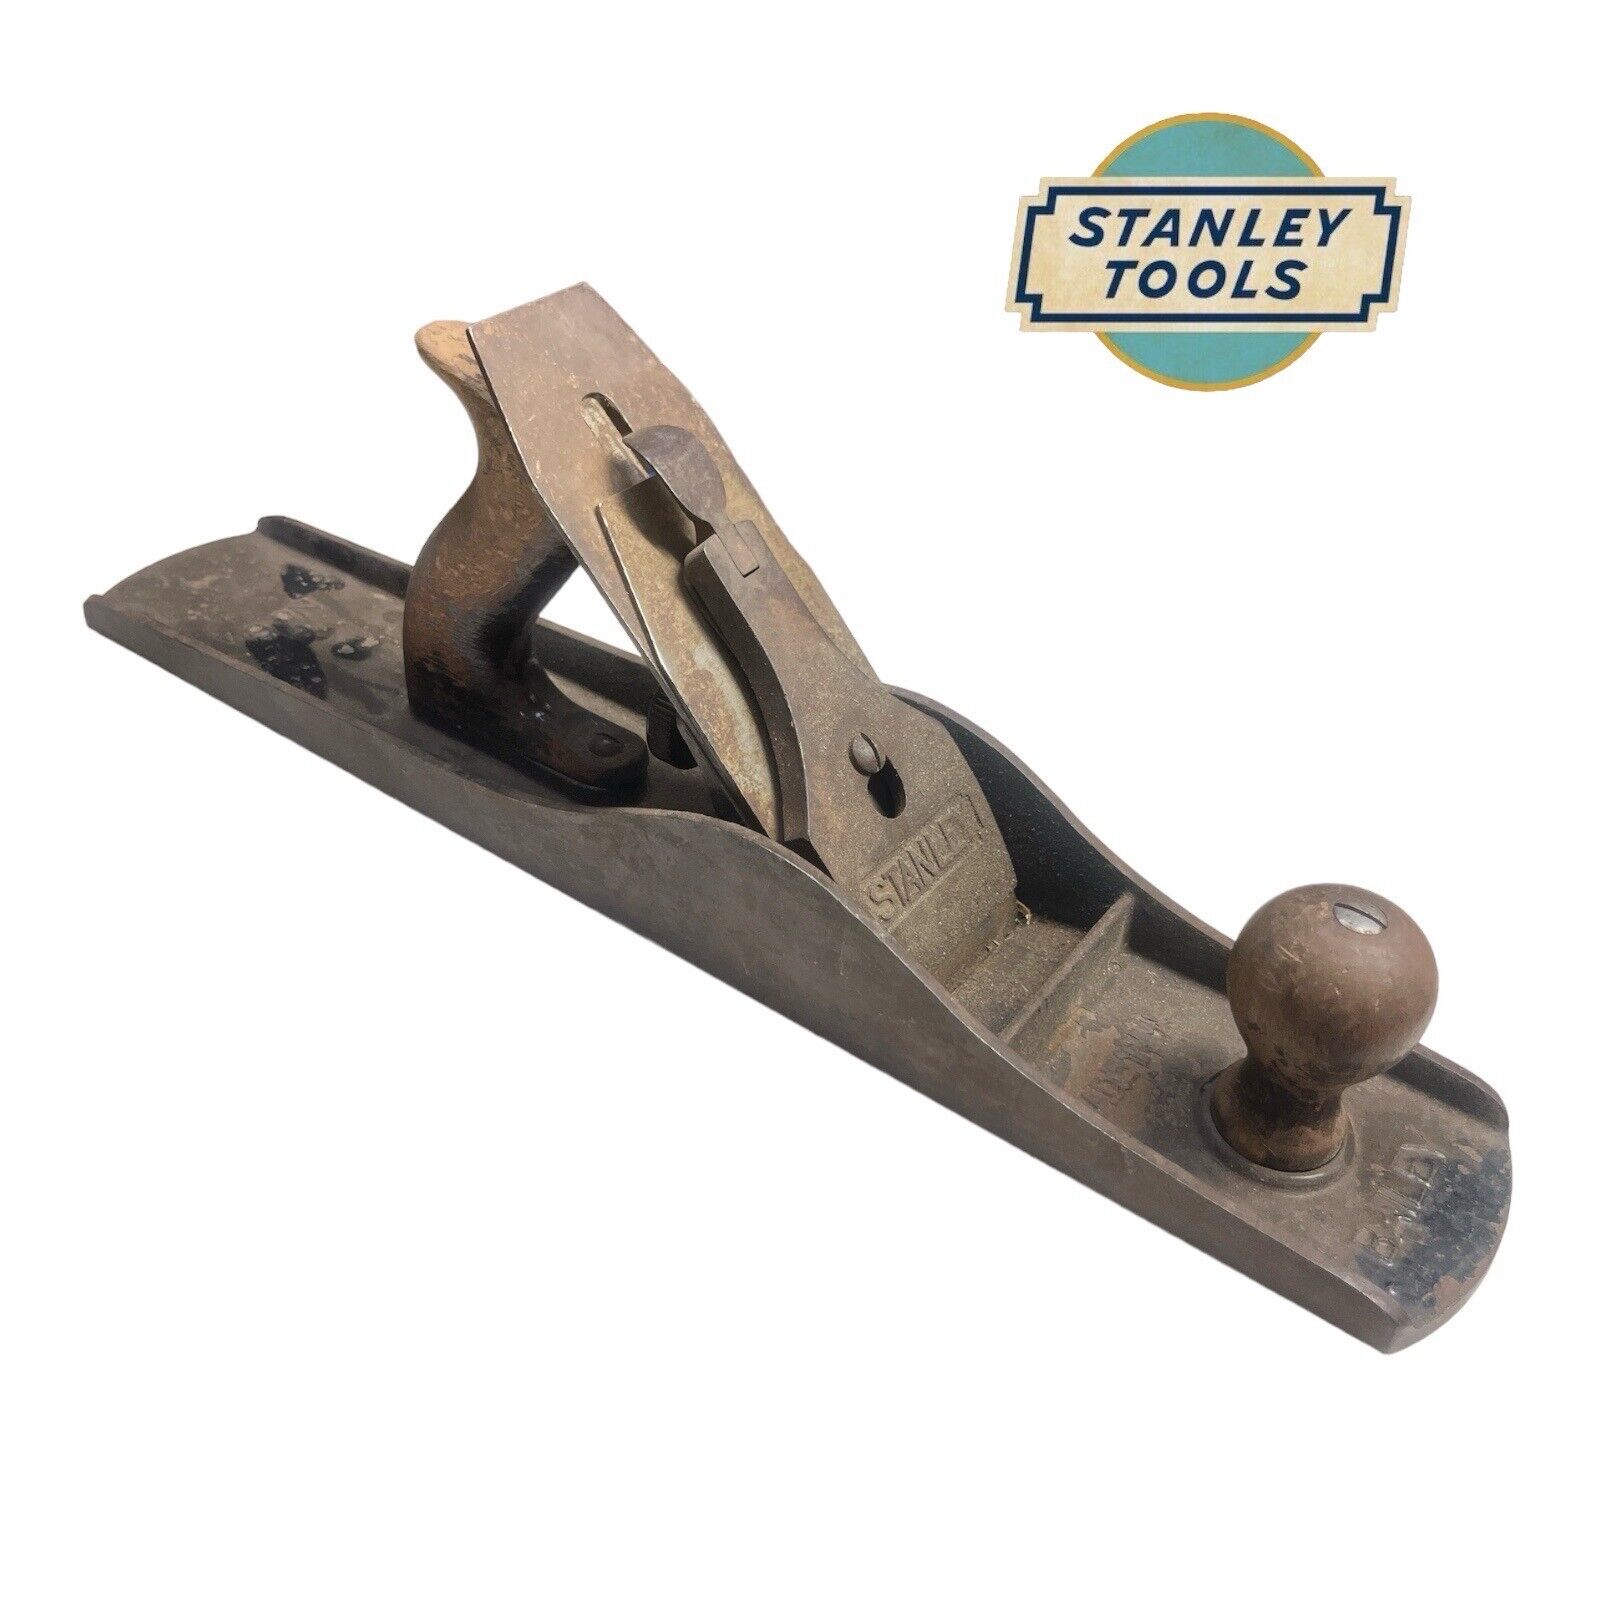 STANLEY BAILEY NO. 6 Plane Thick Casting  Fore Plane